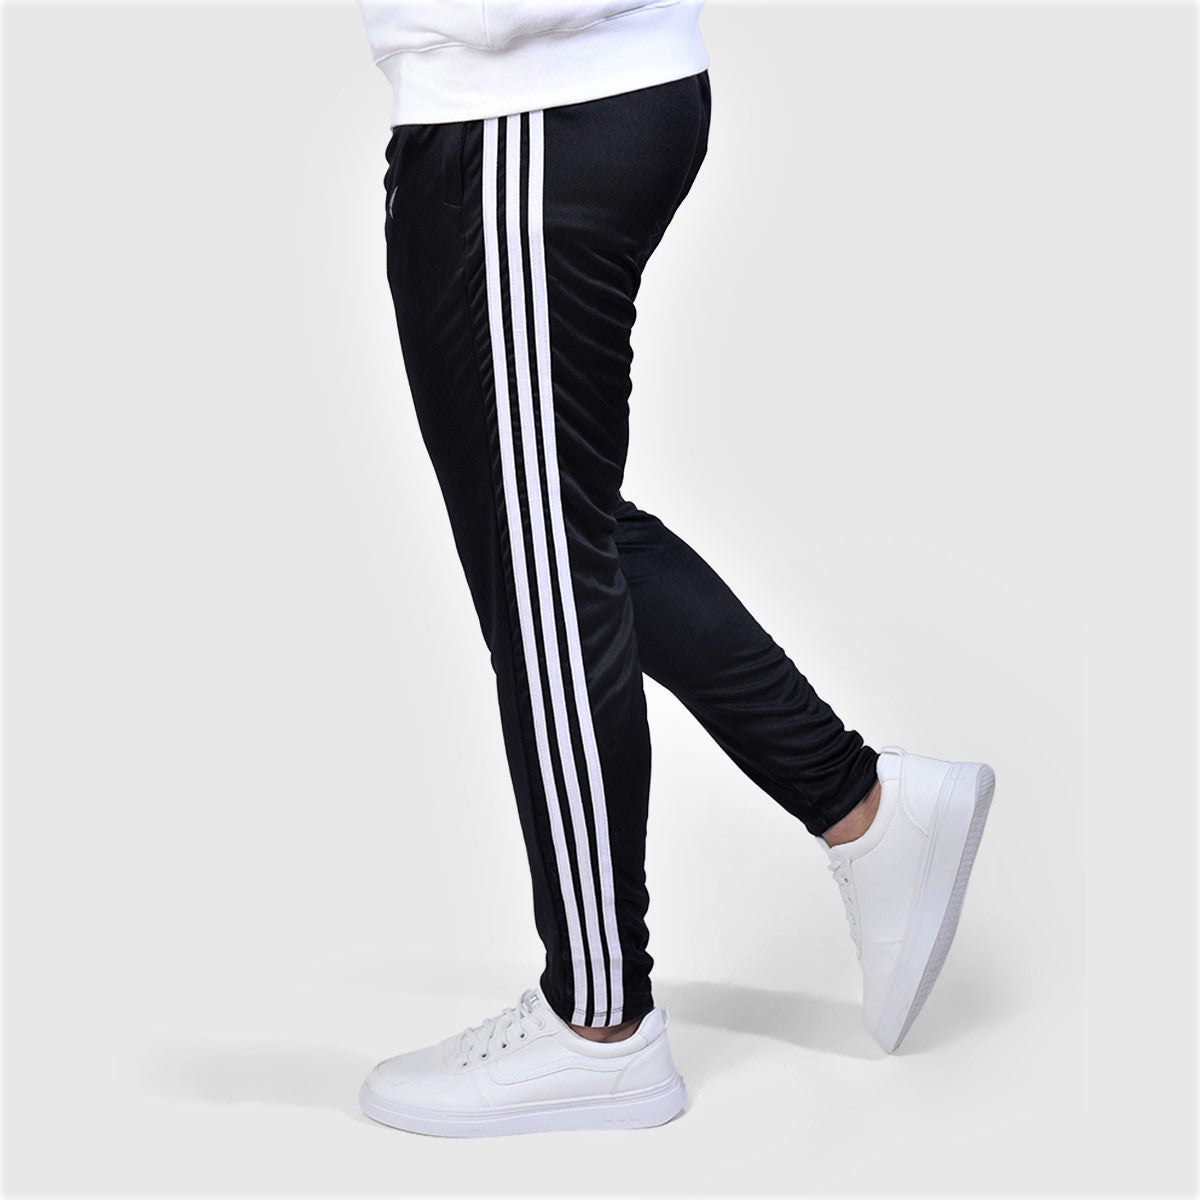 Black Trouser With Three Stripes